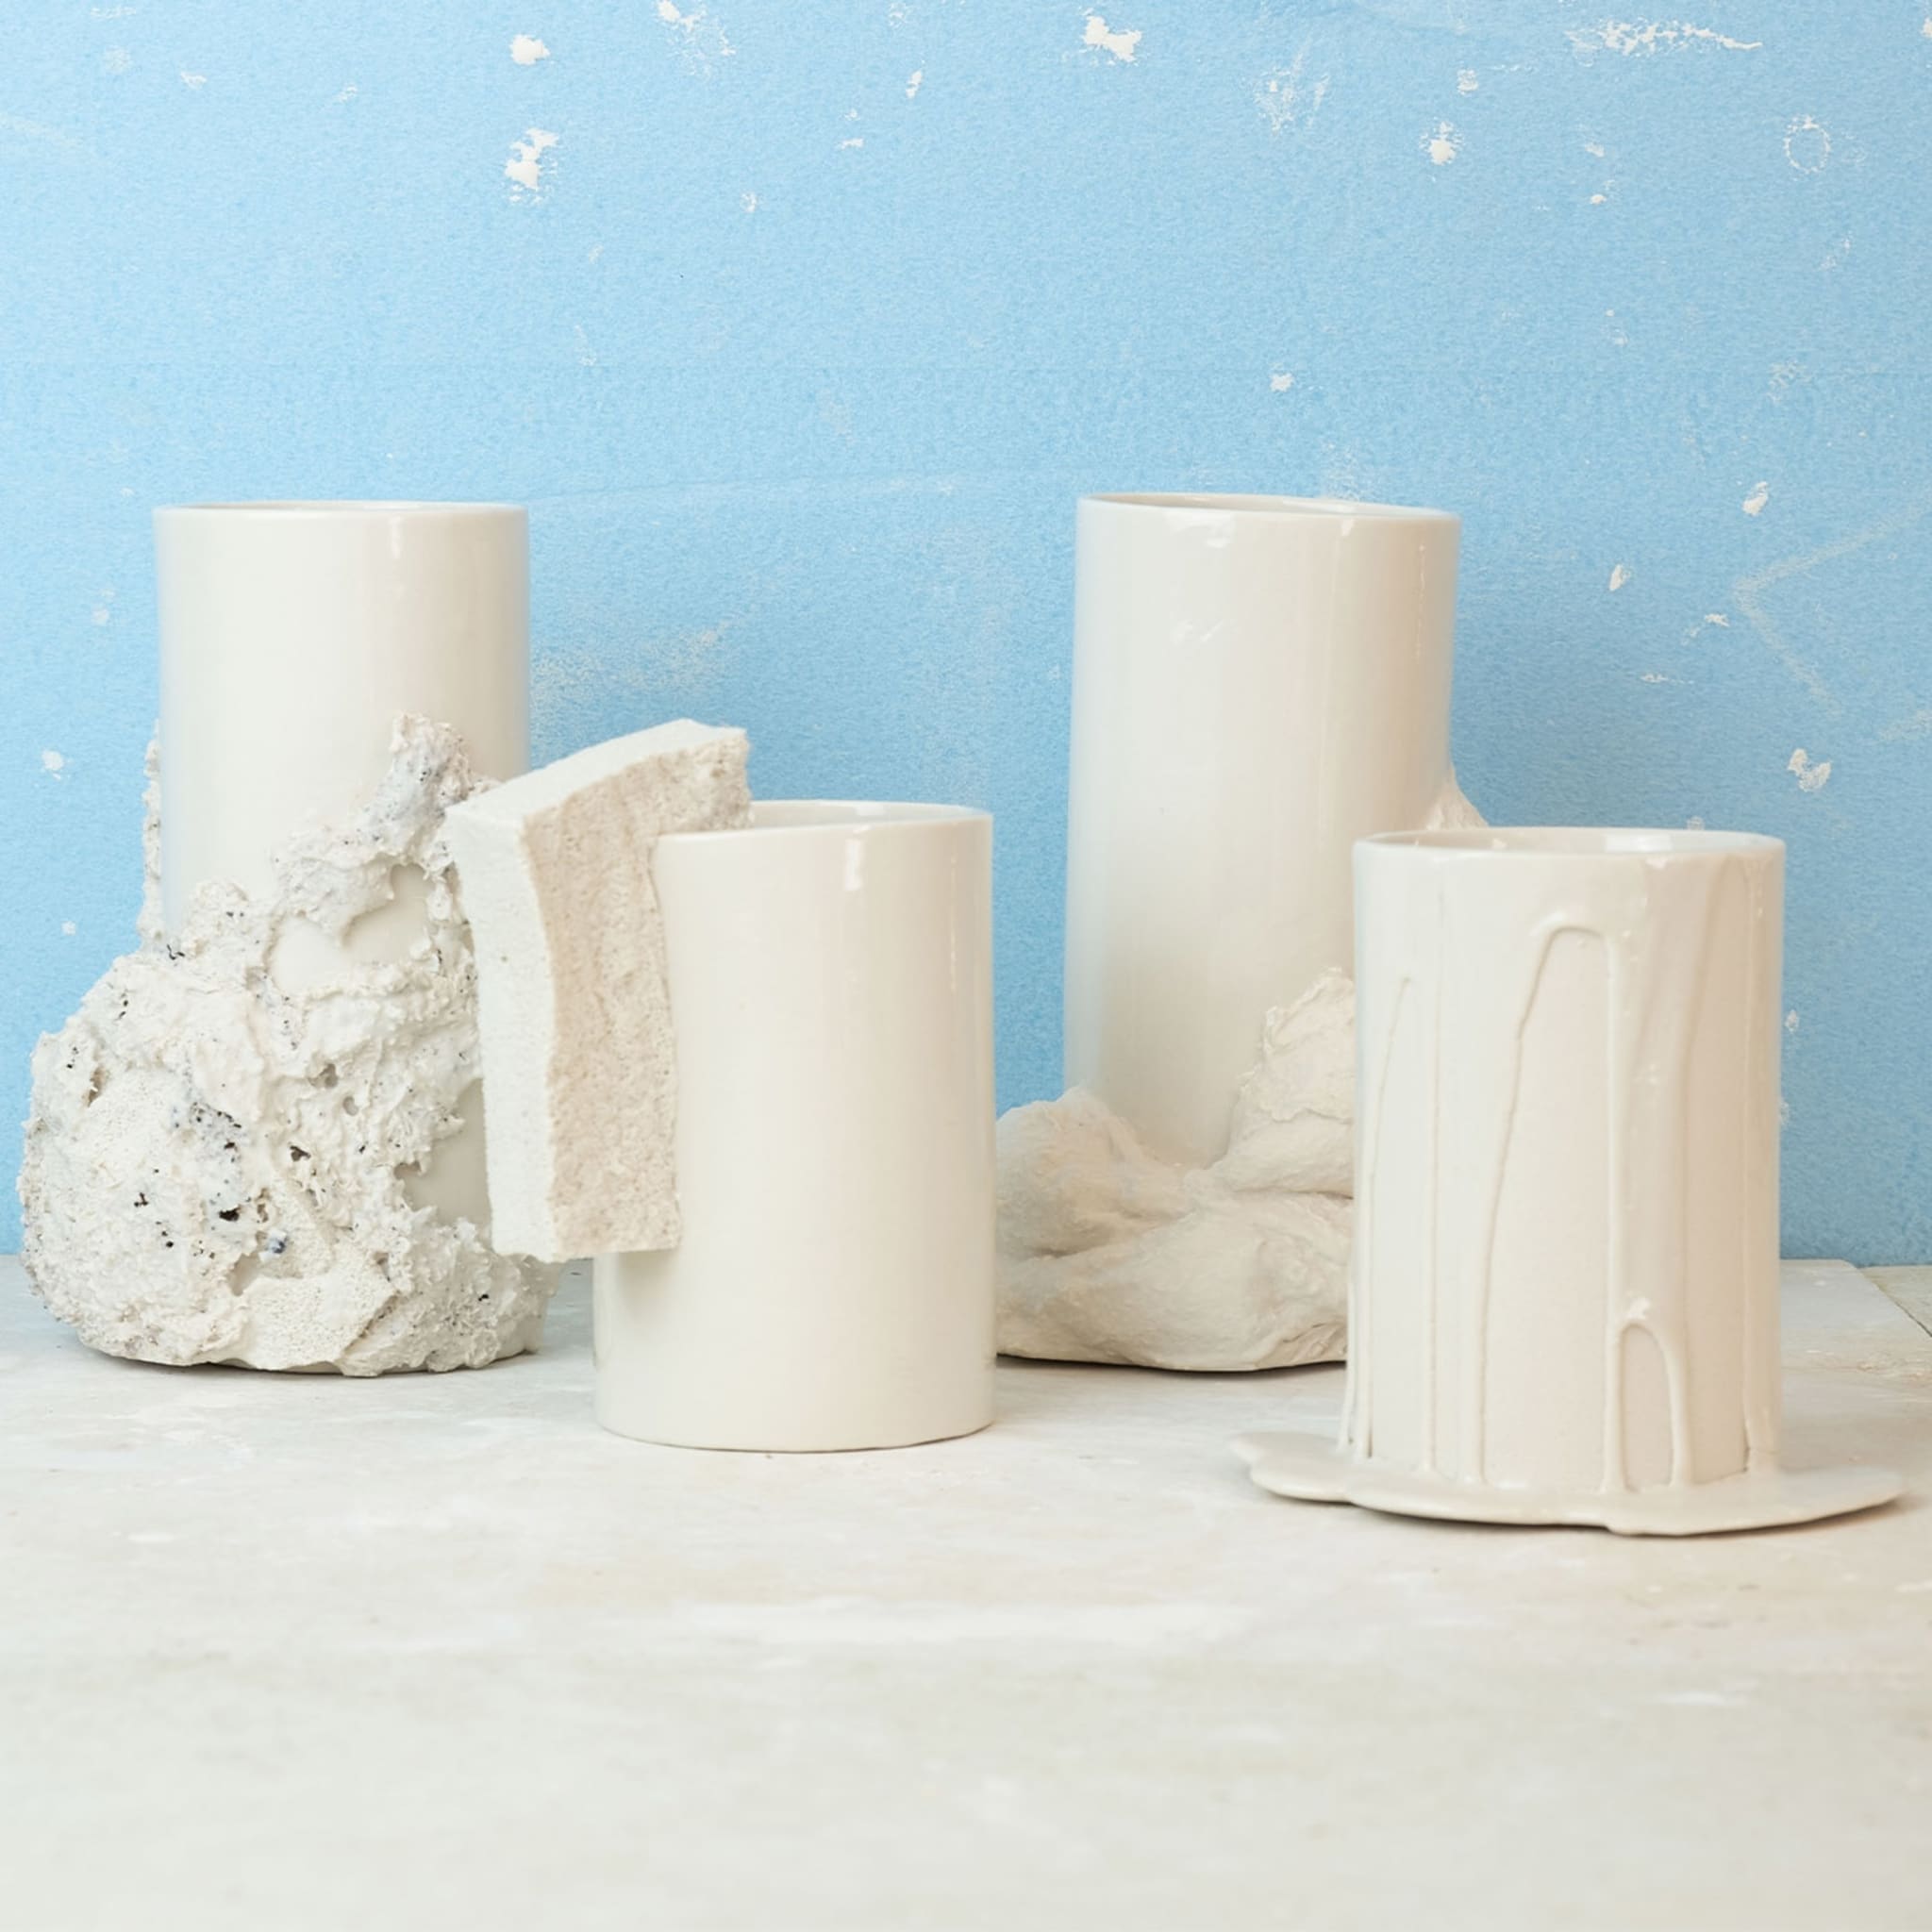 Set Of 4 Vases With Sponges And Lichens By Patricia Urquiola - Alternative view 1